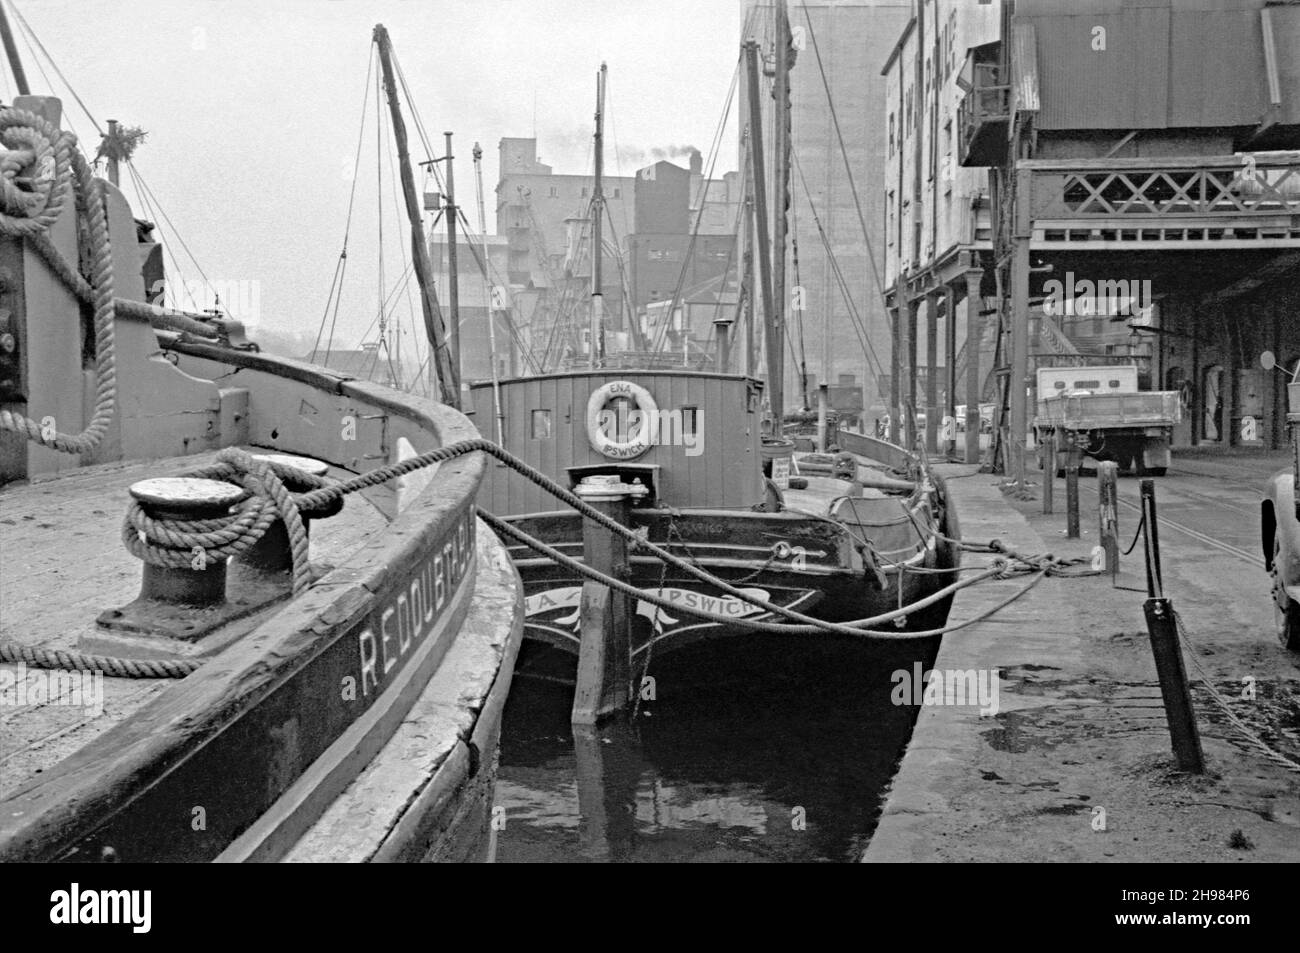 The Wet Dock at the port of Ipswich, Suffolk, England, UK photographed in its last days of commercial traffic in the mid-1960s. Here Thames sailing barges are still being used, mainly for the grain trade, on the River Orwell and the North Sea. Centre is ‘Ena’, a wooden barge built at W B McLearon's yard in Harwich, Essex in 1906. She is a notable World War II Dunkirk ‘little ship’ reputed to have rescued 100 men in 1940. A major regeneration of the area has taken place since the 1990s and the port’s commercial activity is now located further downstream – a vintage 1960s photograph. Stock Photo